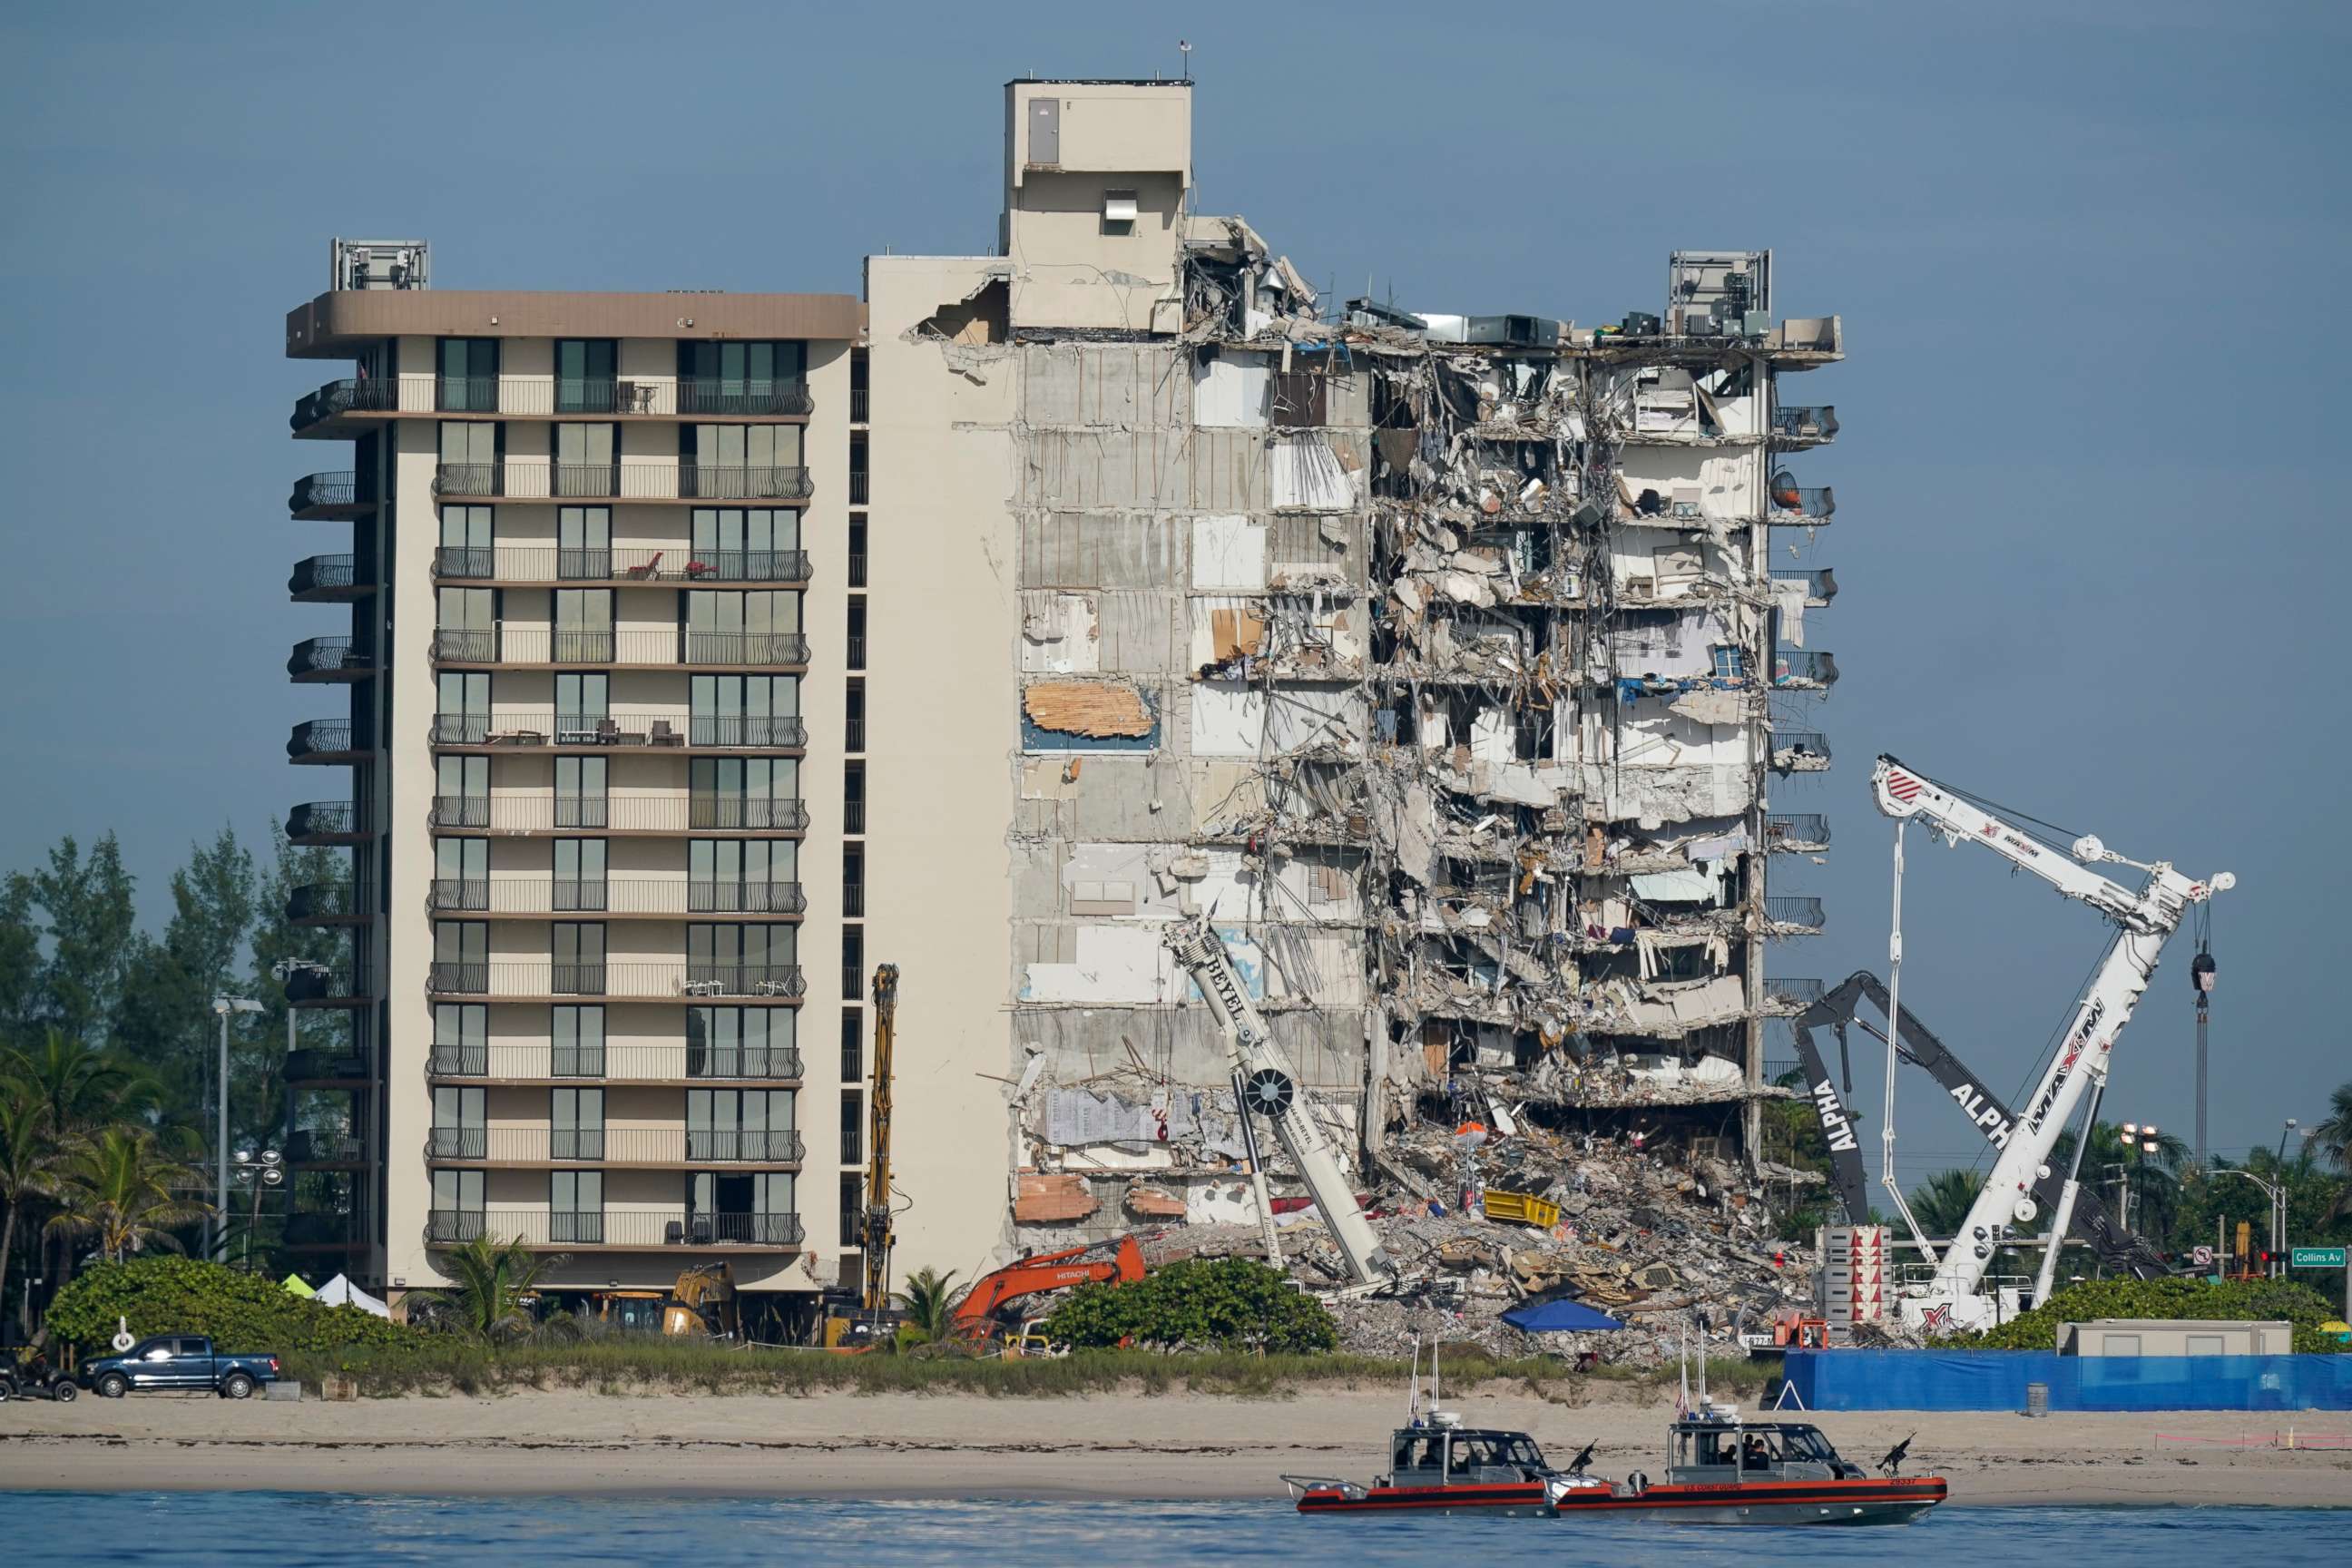 PHOTO: Coast Guard boats patrol in front of the partially collapsed Champlain Towers South condo building, ahead of a planned visit to the site by President Joe Biden, in Surfside, Fla., July 1, 2021.